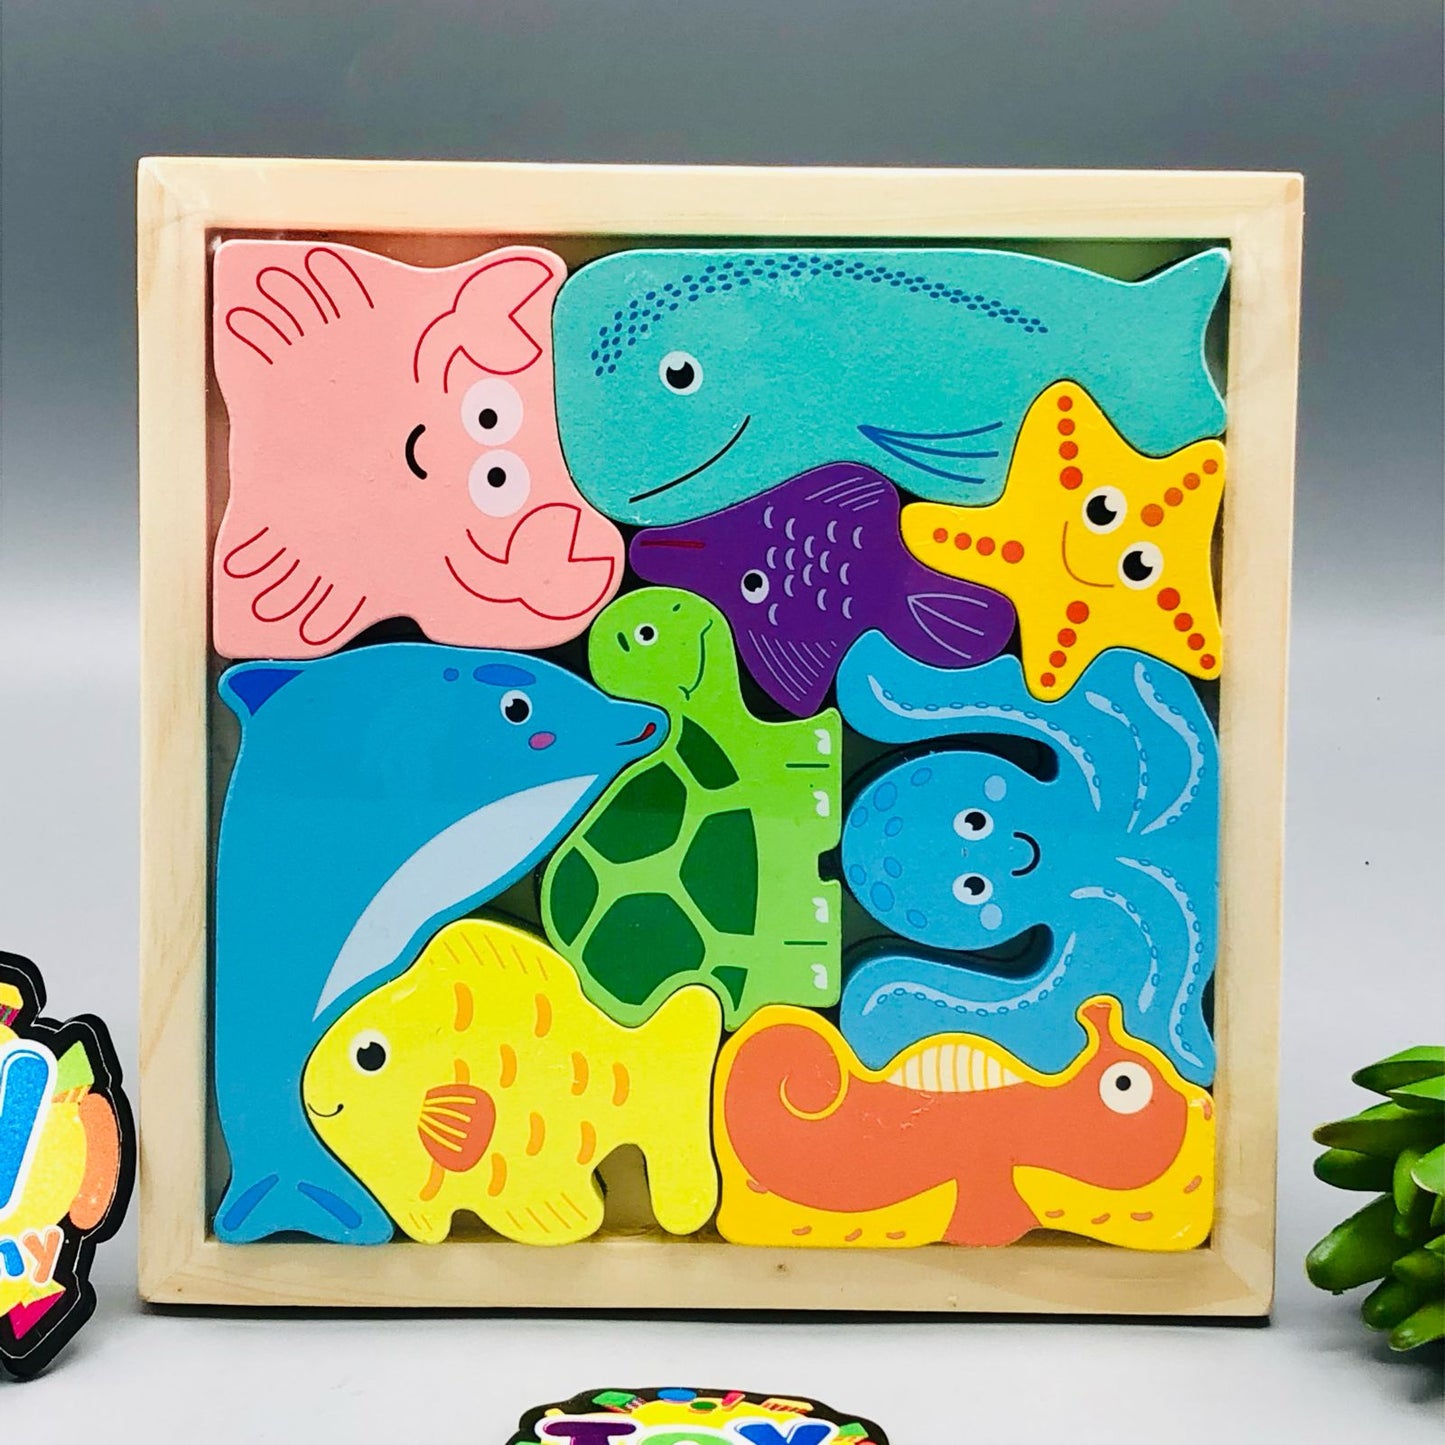 9Pcs Wooden Animal Shapes Puzzle Board